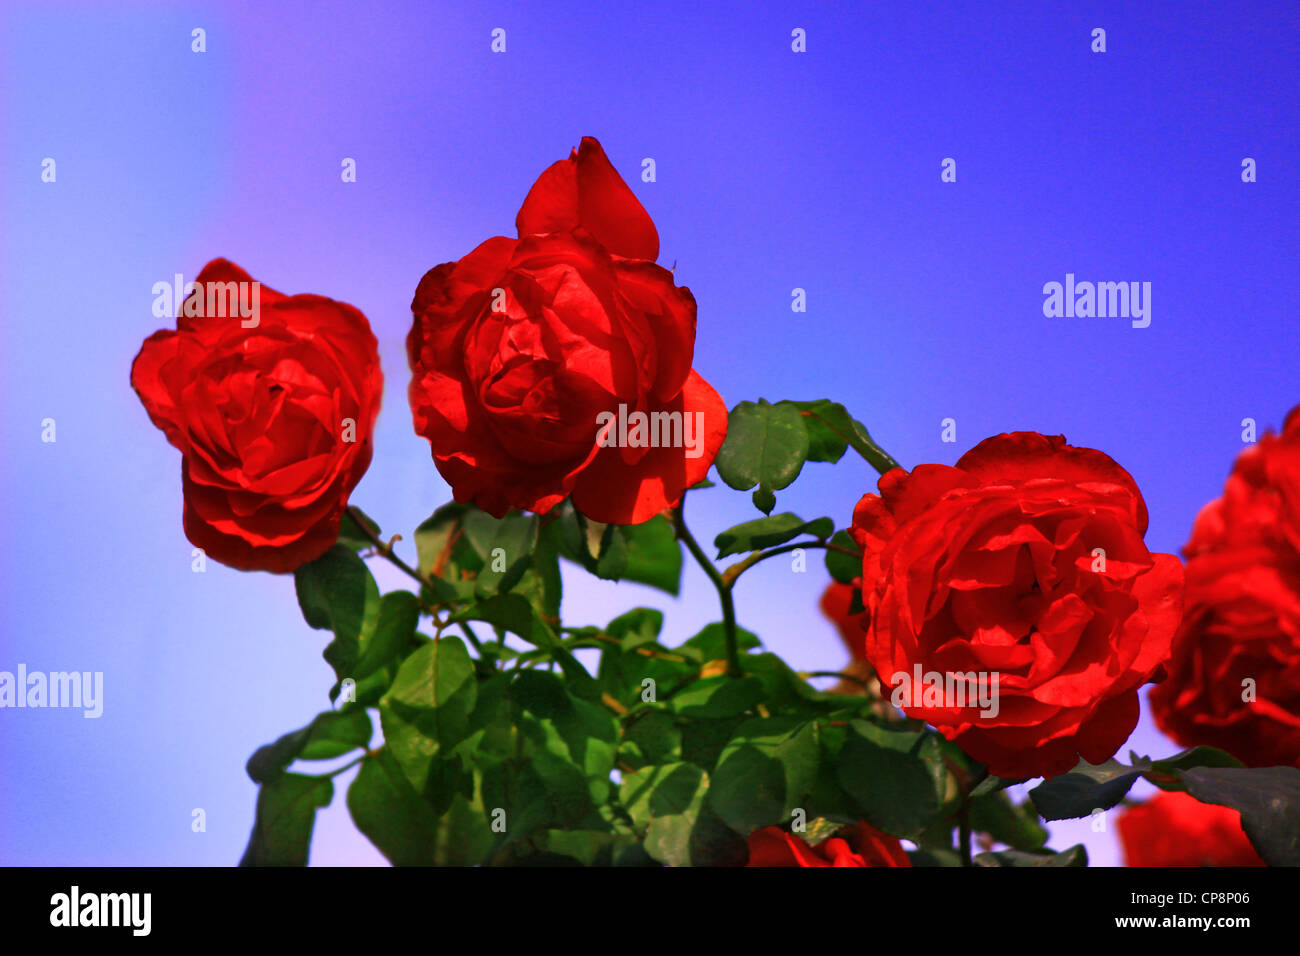 Roses on branch in garden against blurry blue and magenta sky background Stock Photo